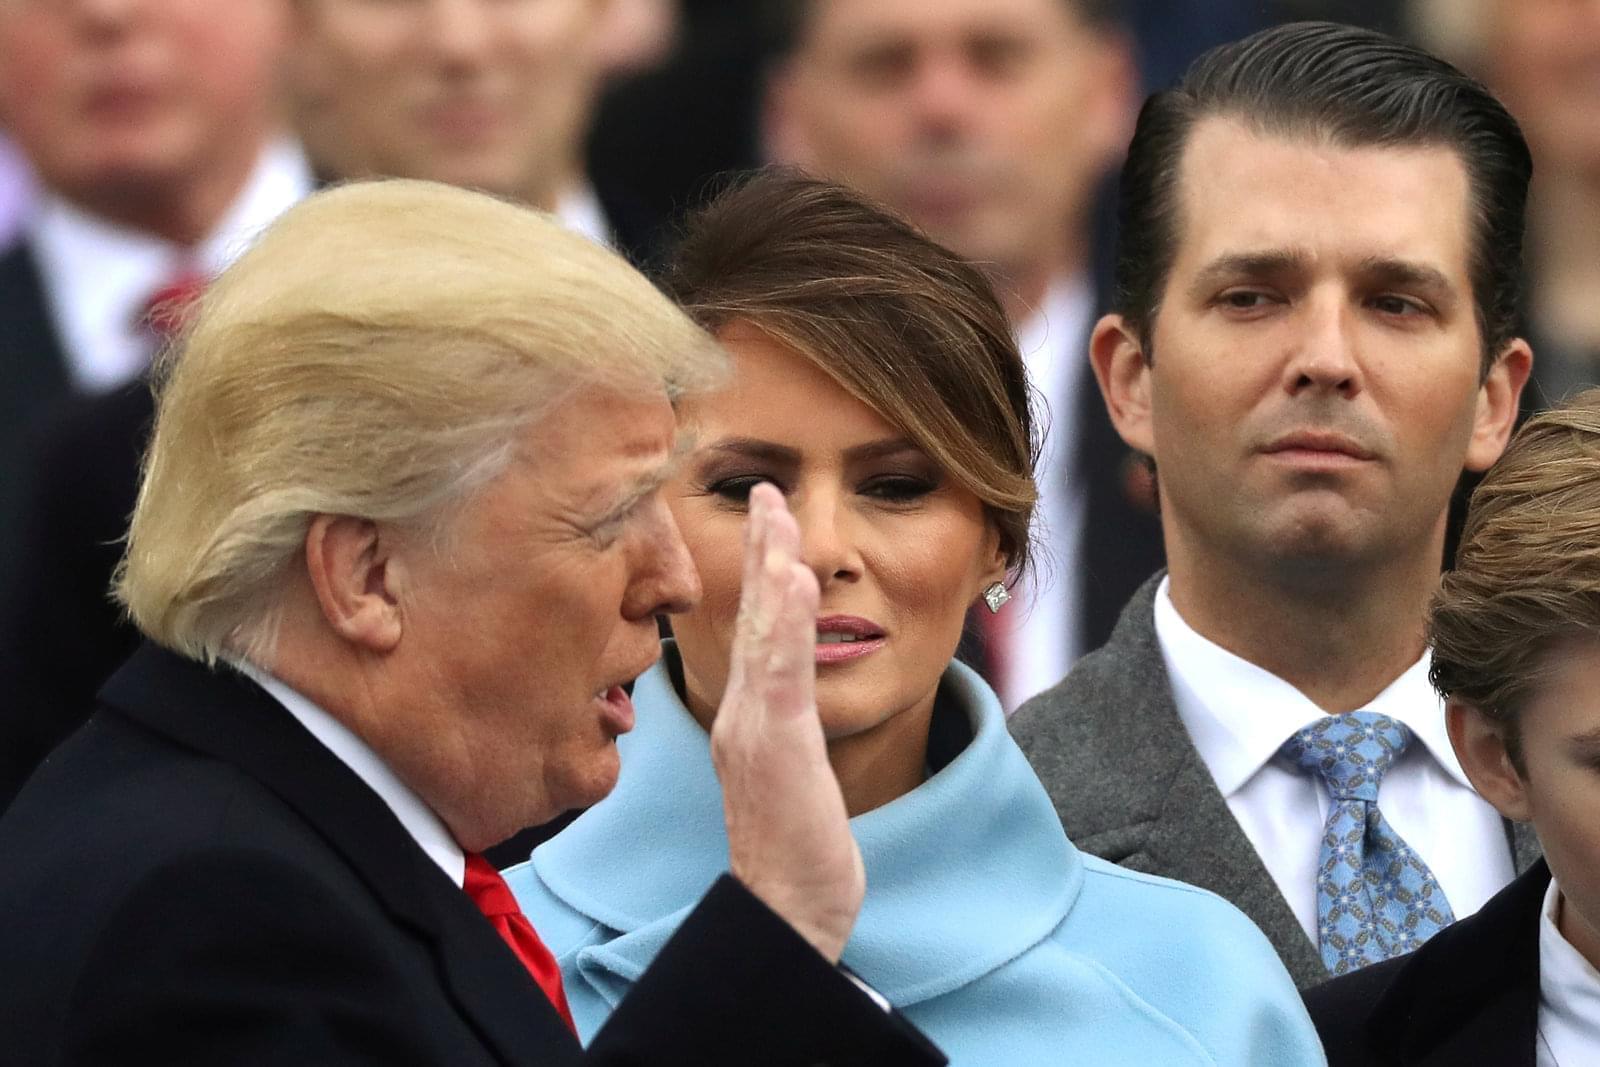 Donald Trump Jr., far right during his father's inauguration, has released an email exchange about setting up a meeting in 2016 with a Russian lawyer who he is told has damaging information about Hillary Clinton. 